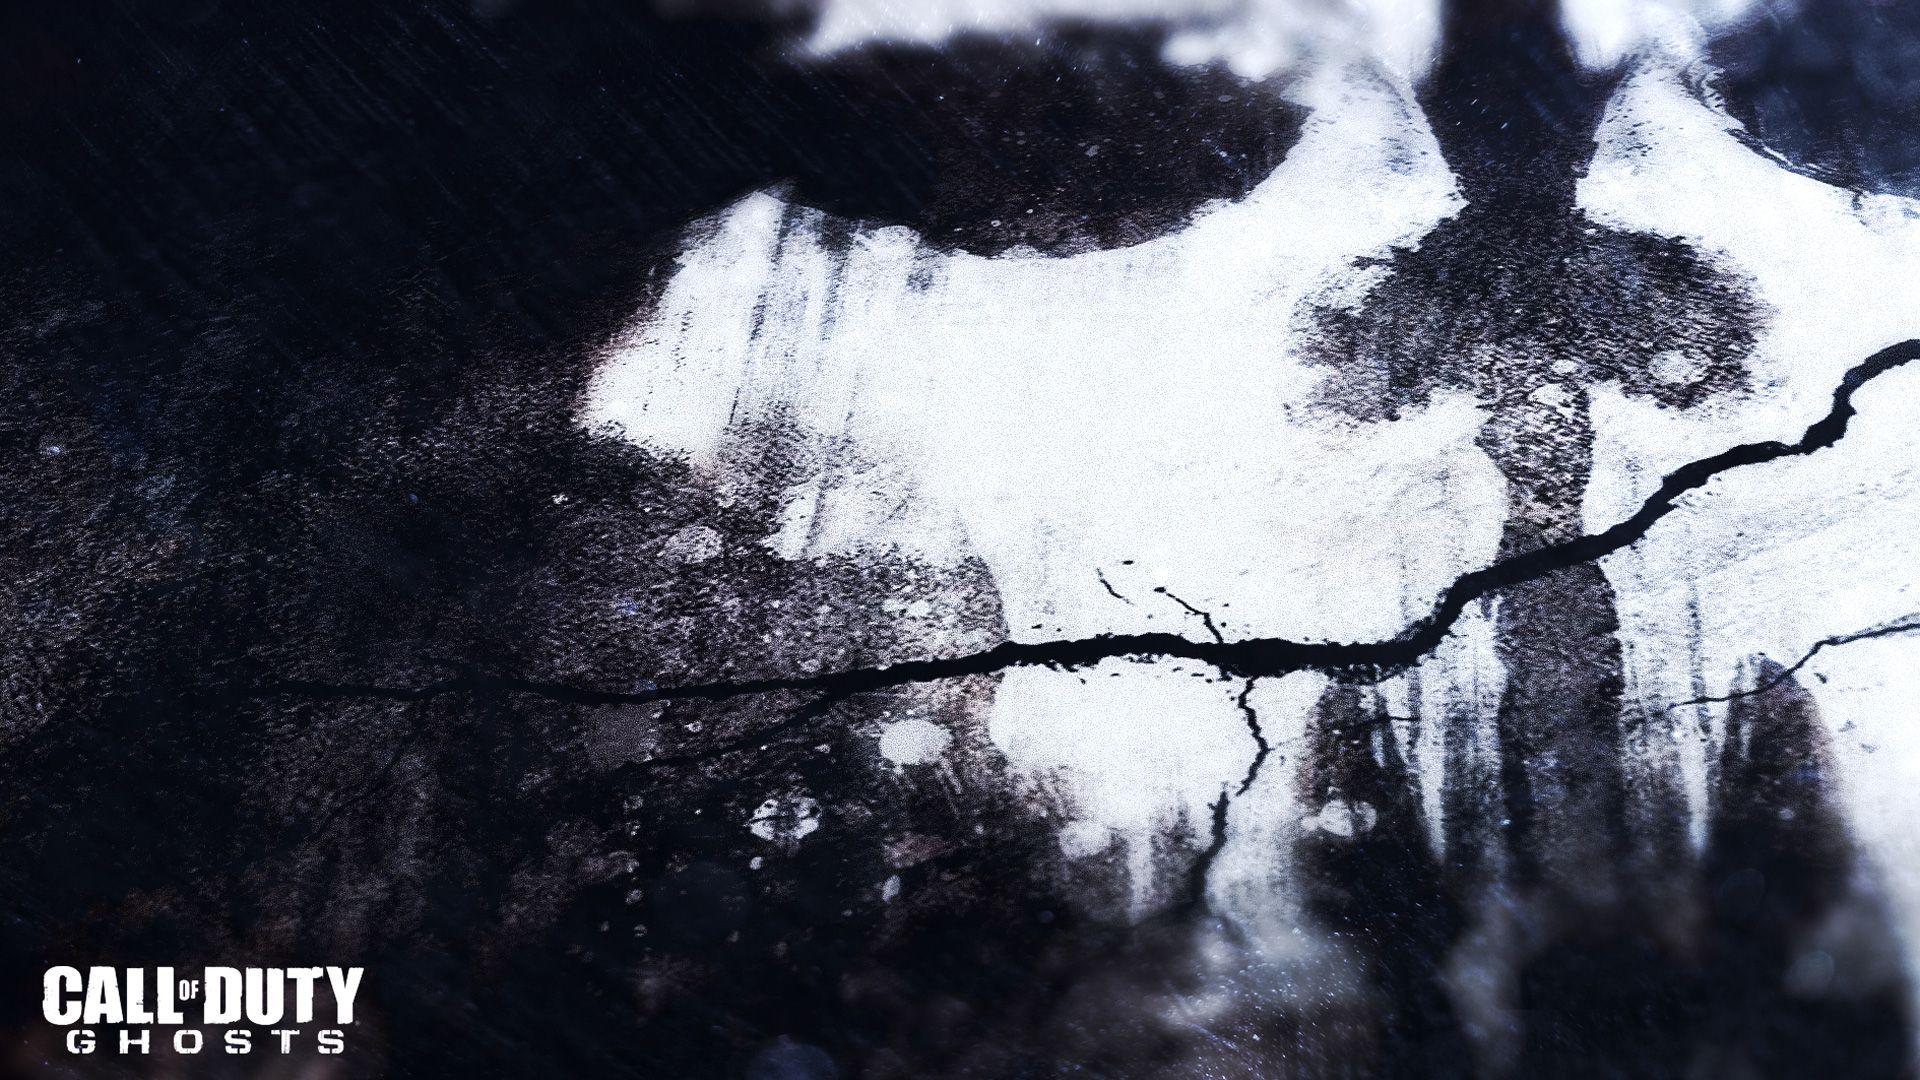 Call of Duty: Ghosts HD Wallpaper 16 X 1080